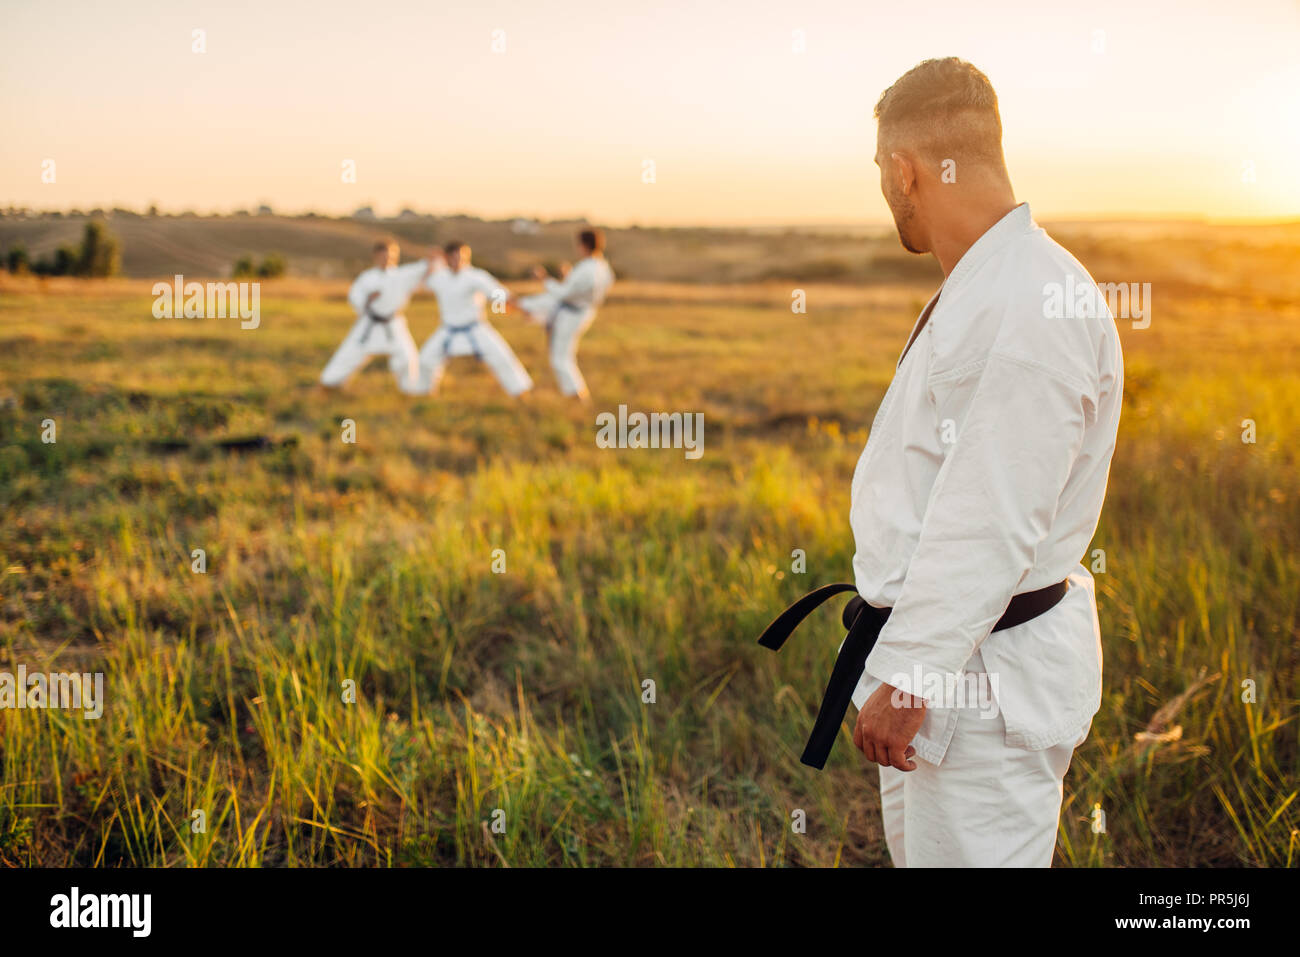 Karate master looks at the training of his class, summer field on background. Martial art school on workout outdoor, technique practice Stock Photo